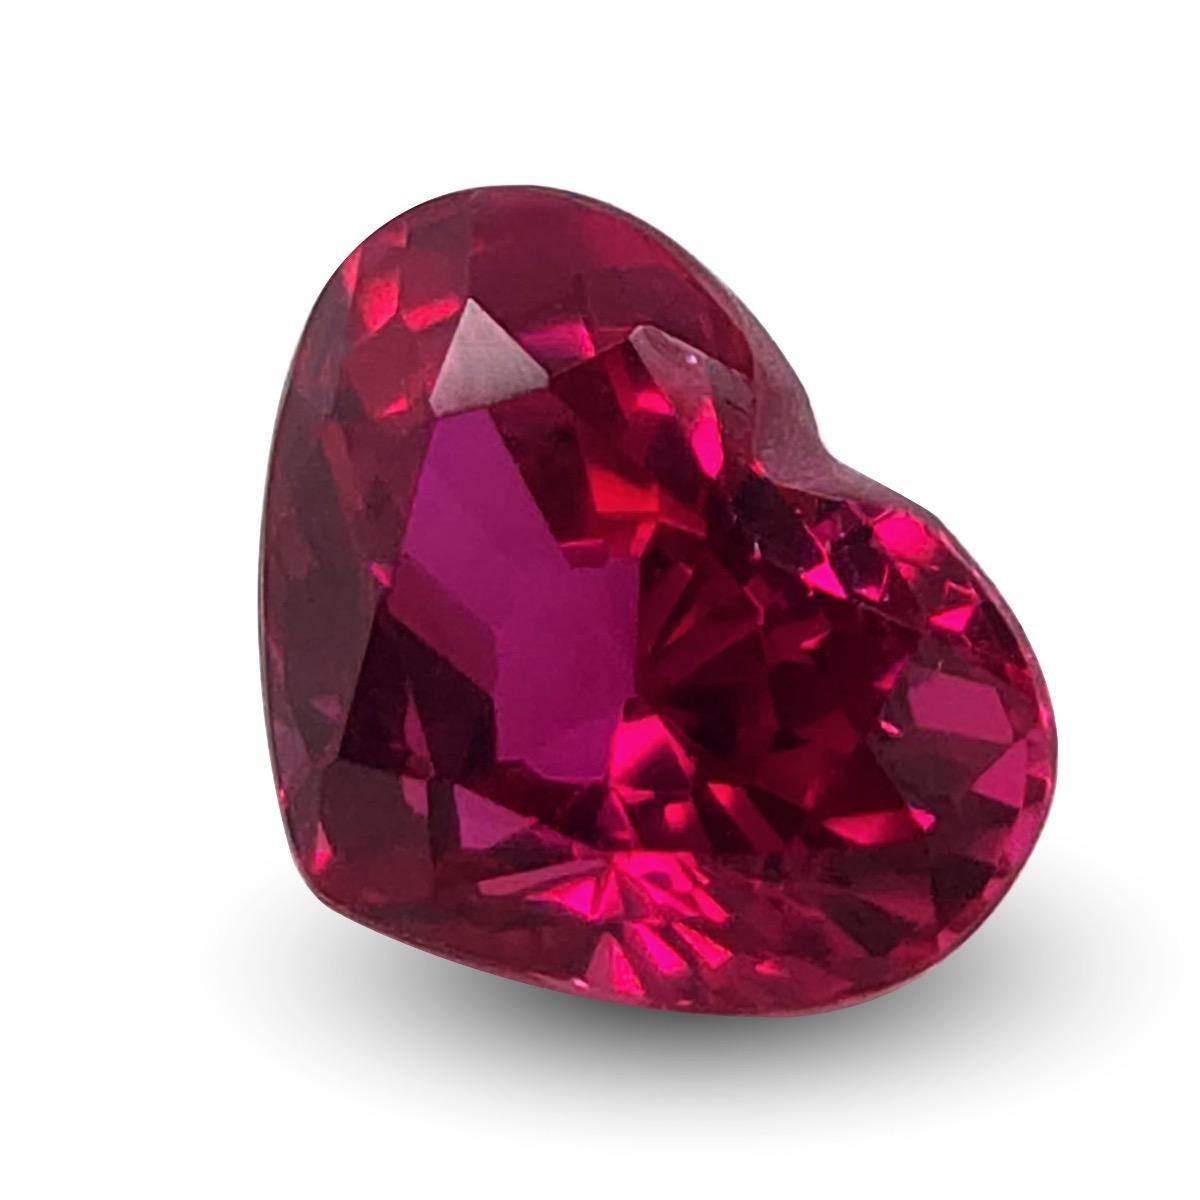 Mixed Cut GIA Certified 1.49 Carats Heated Mozambique Ruby For Sale